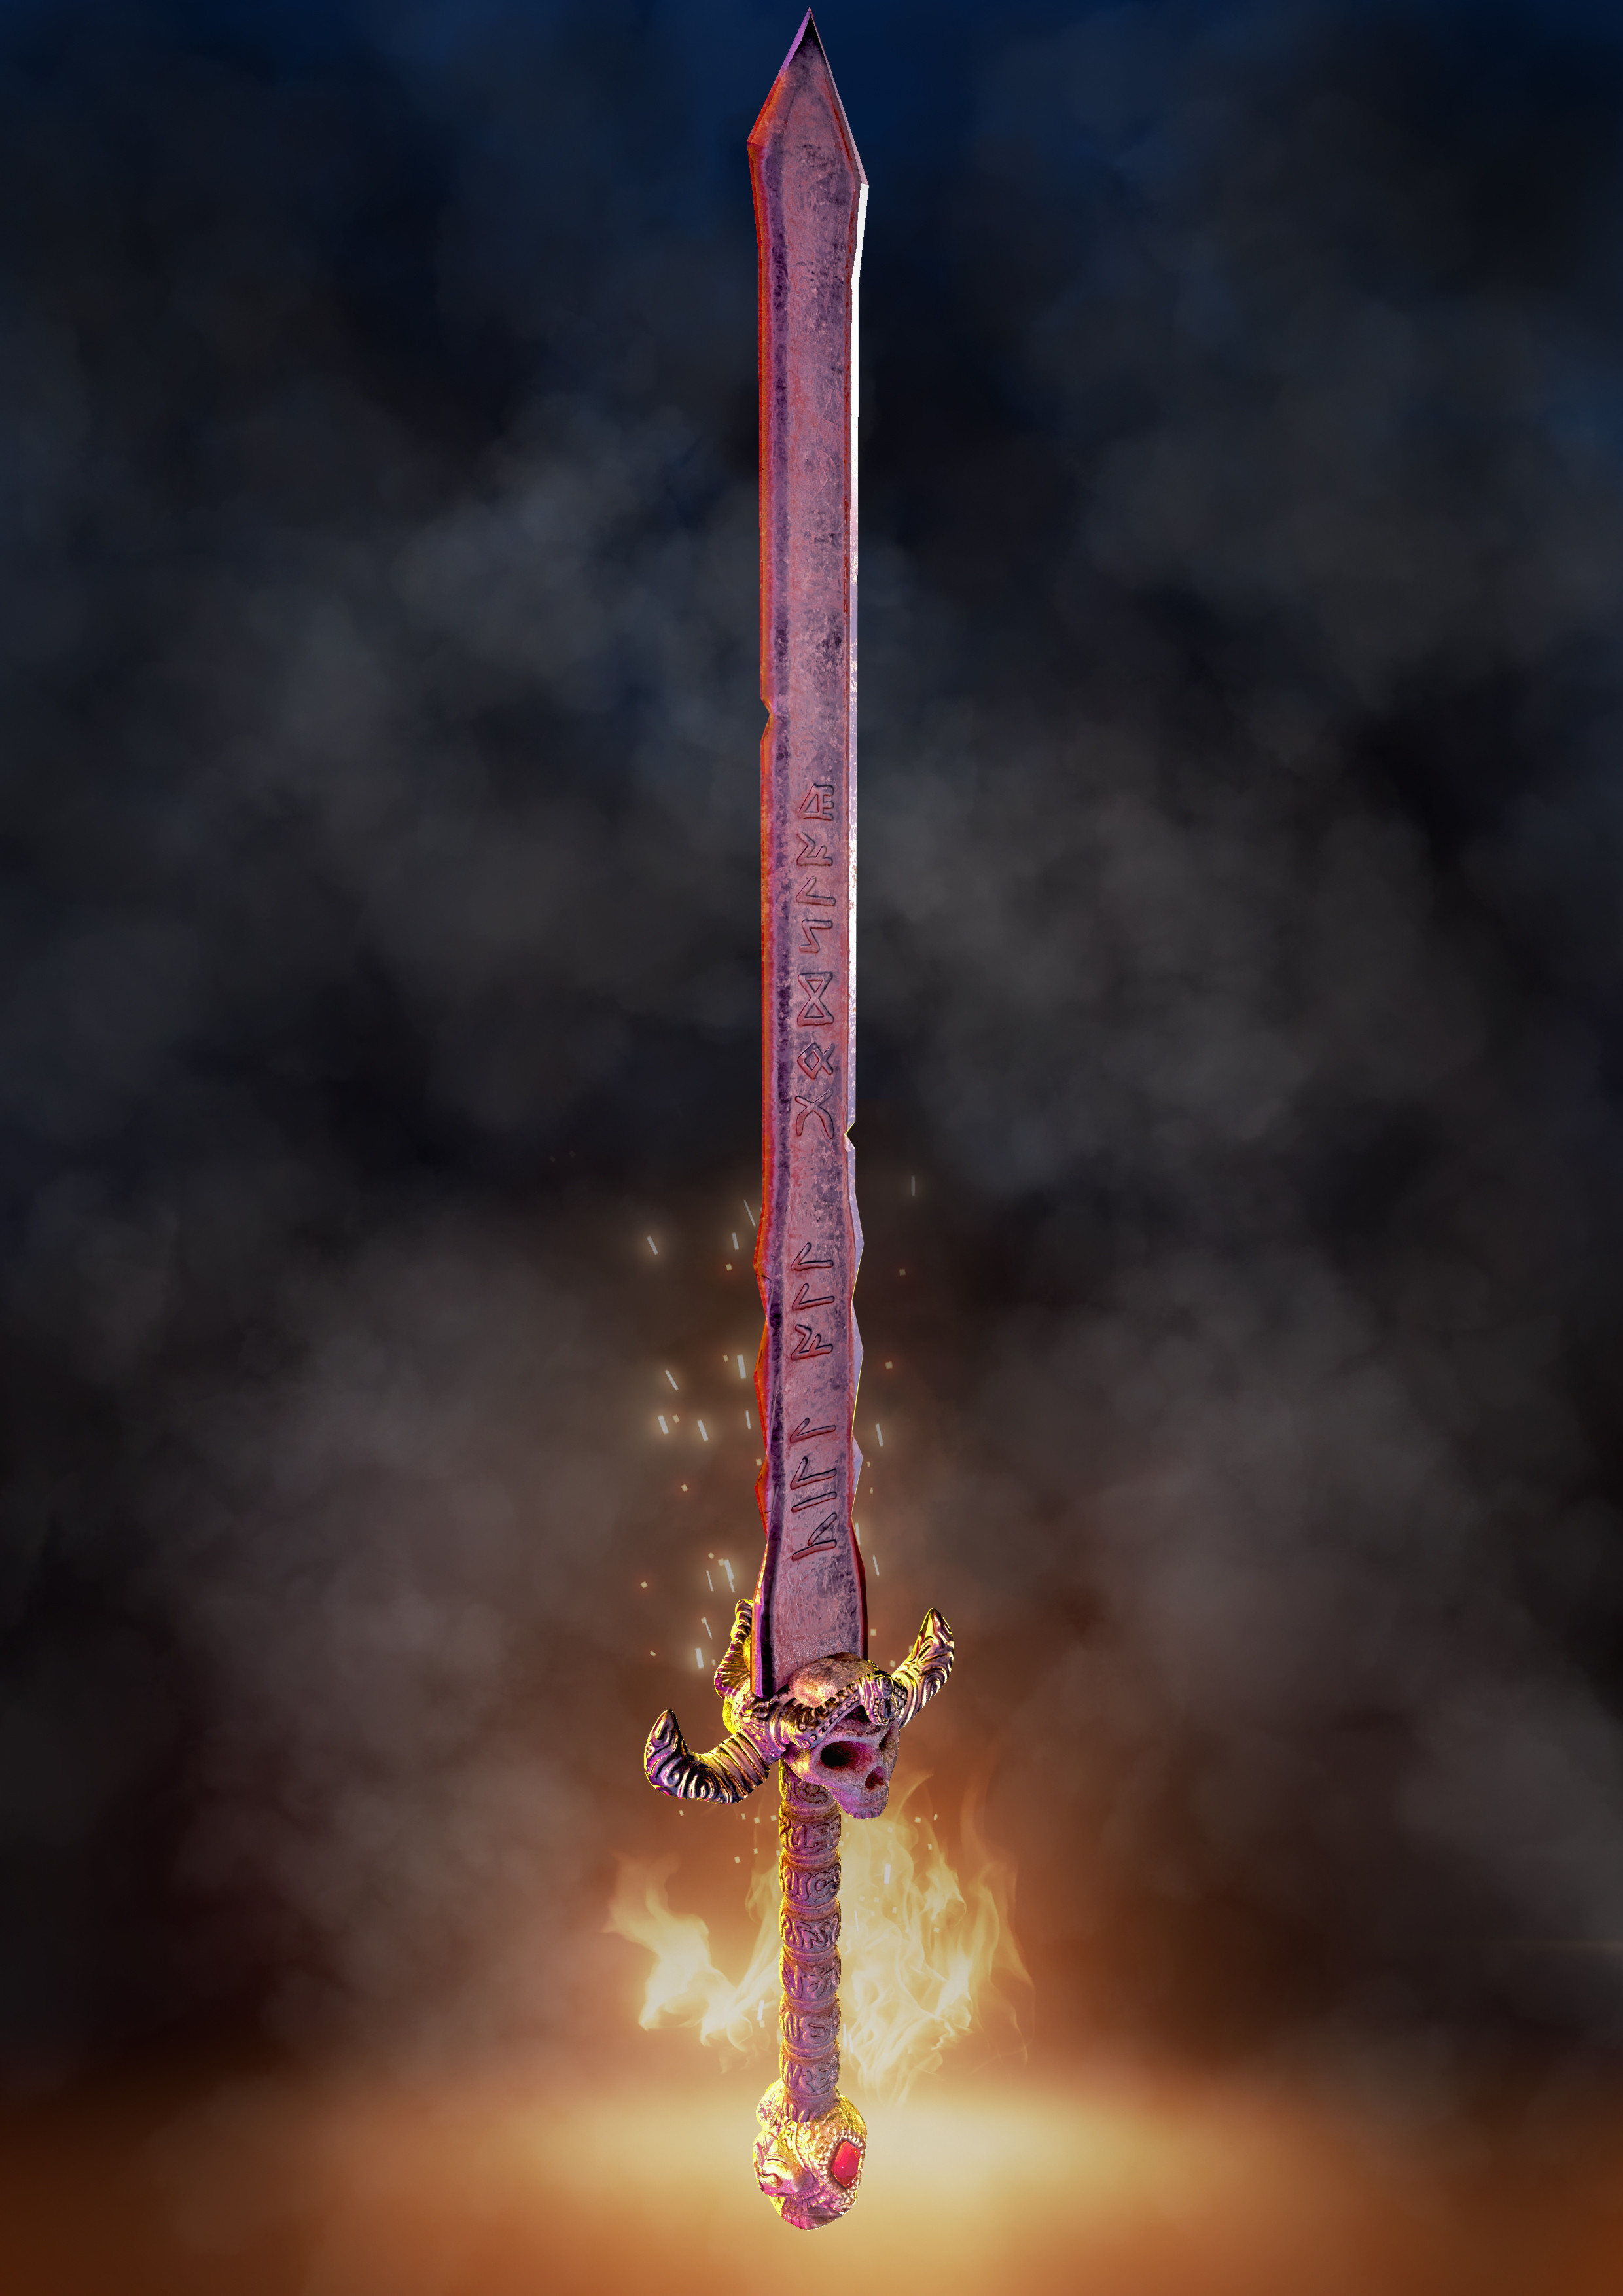 Been practising with Arnold renderer yesterday. Modelled this wee little low poly sword and textured it yesterday.